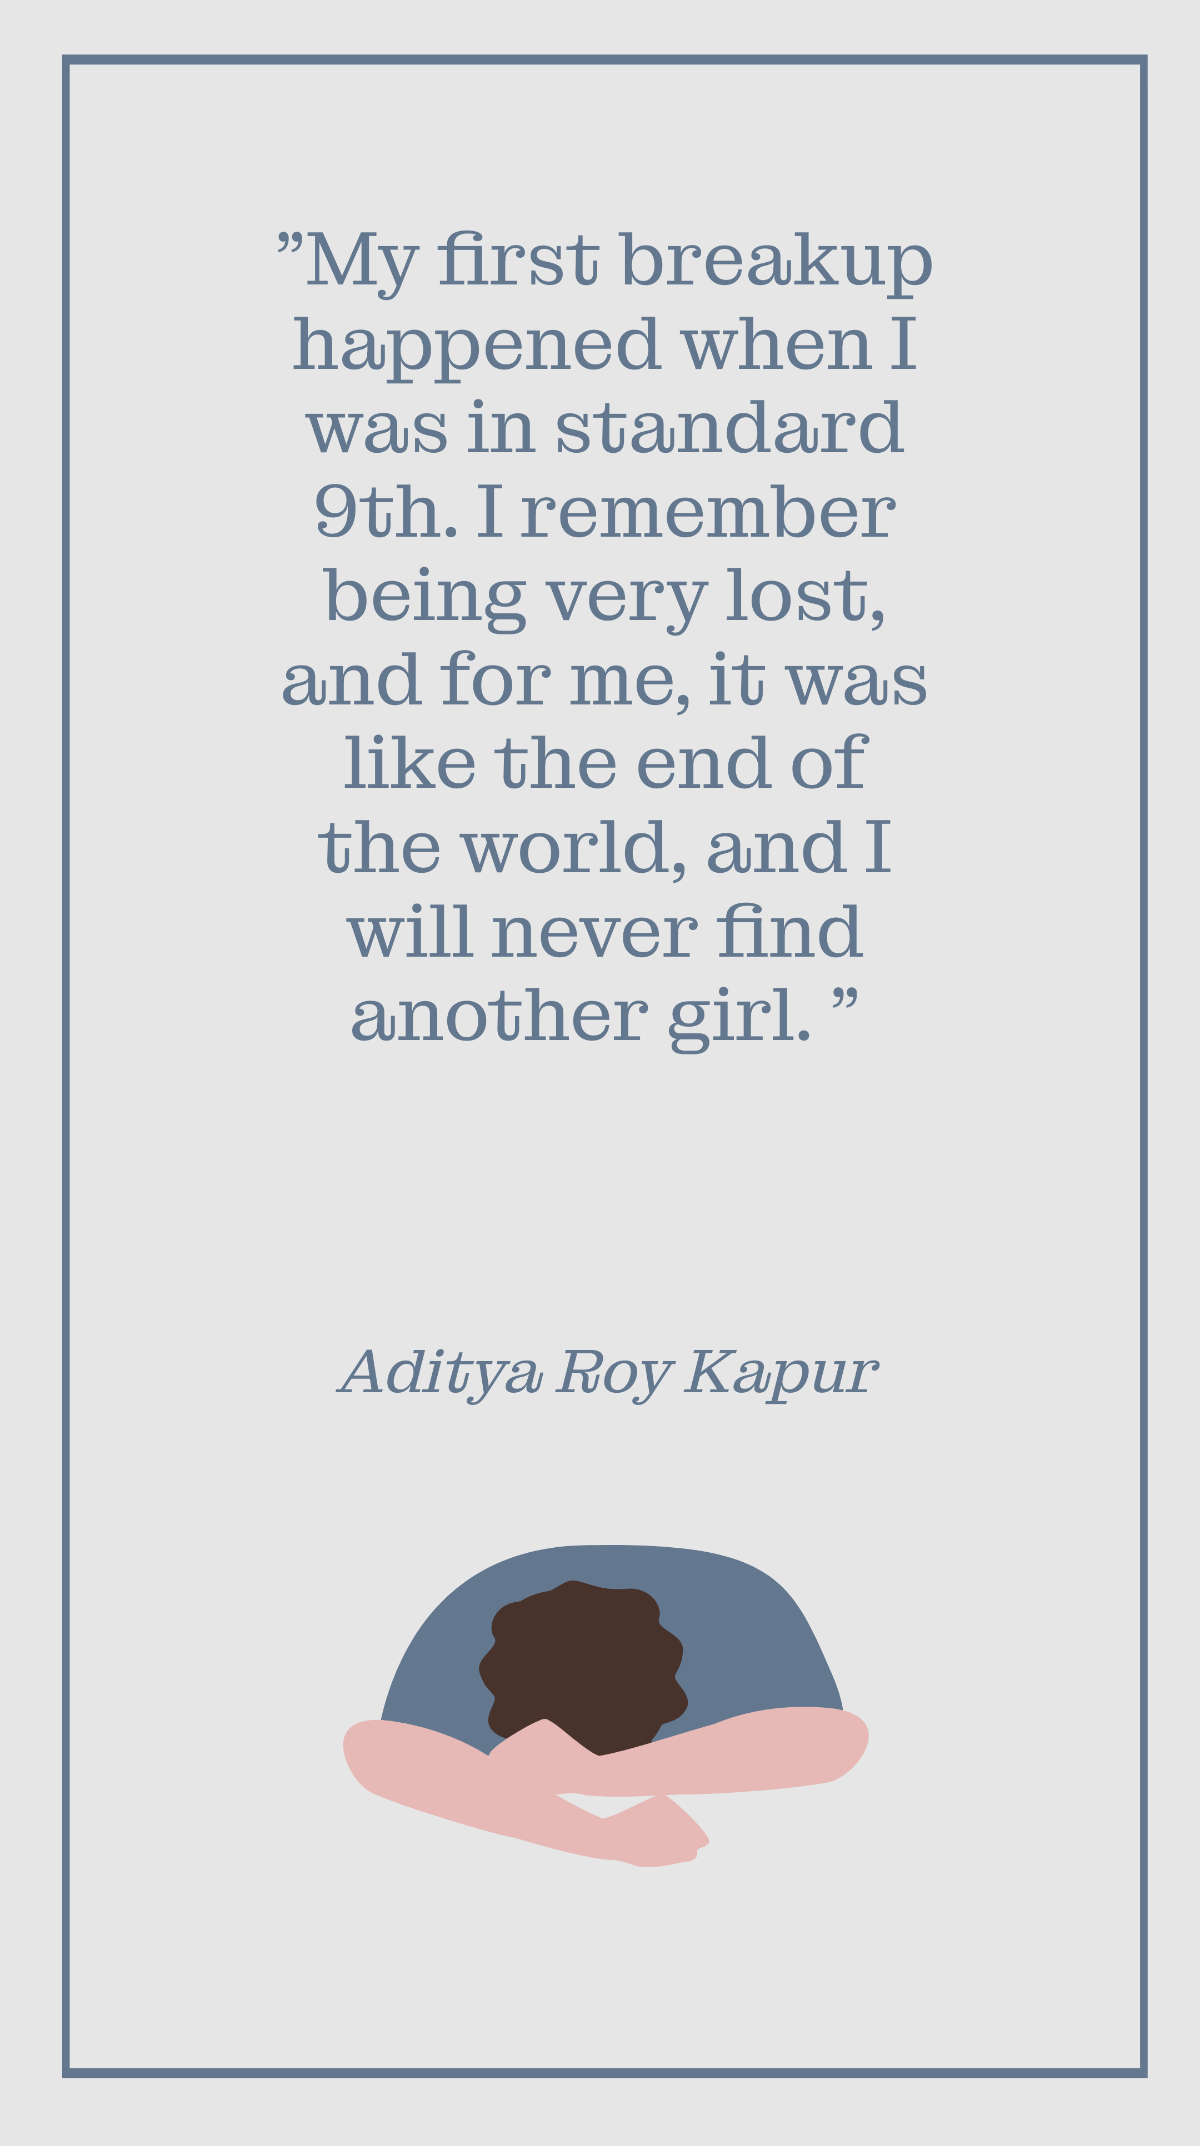 Aditya Roy Kapur - My first breakup happened when I was in standard 9th. I remember being very lost, and for me, it was like the end of the world, and I will never find another girl. Template